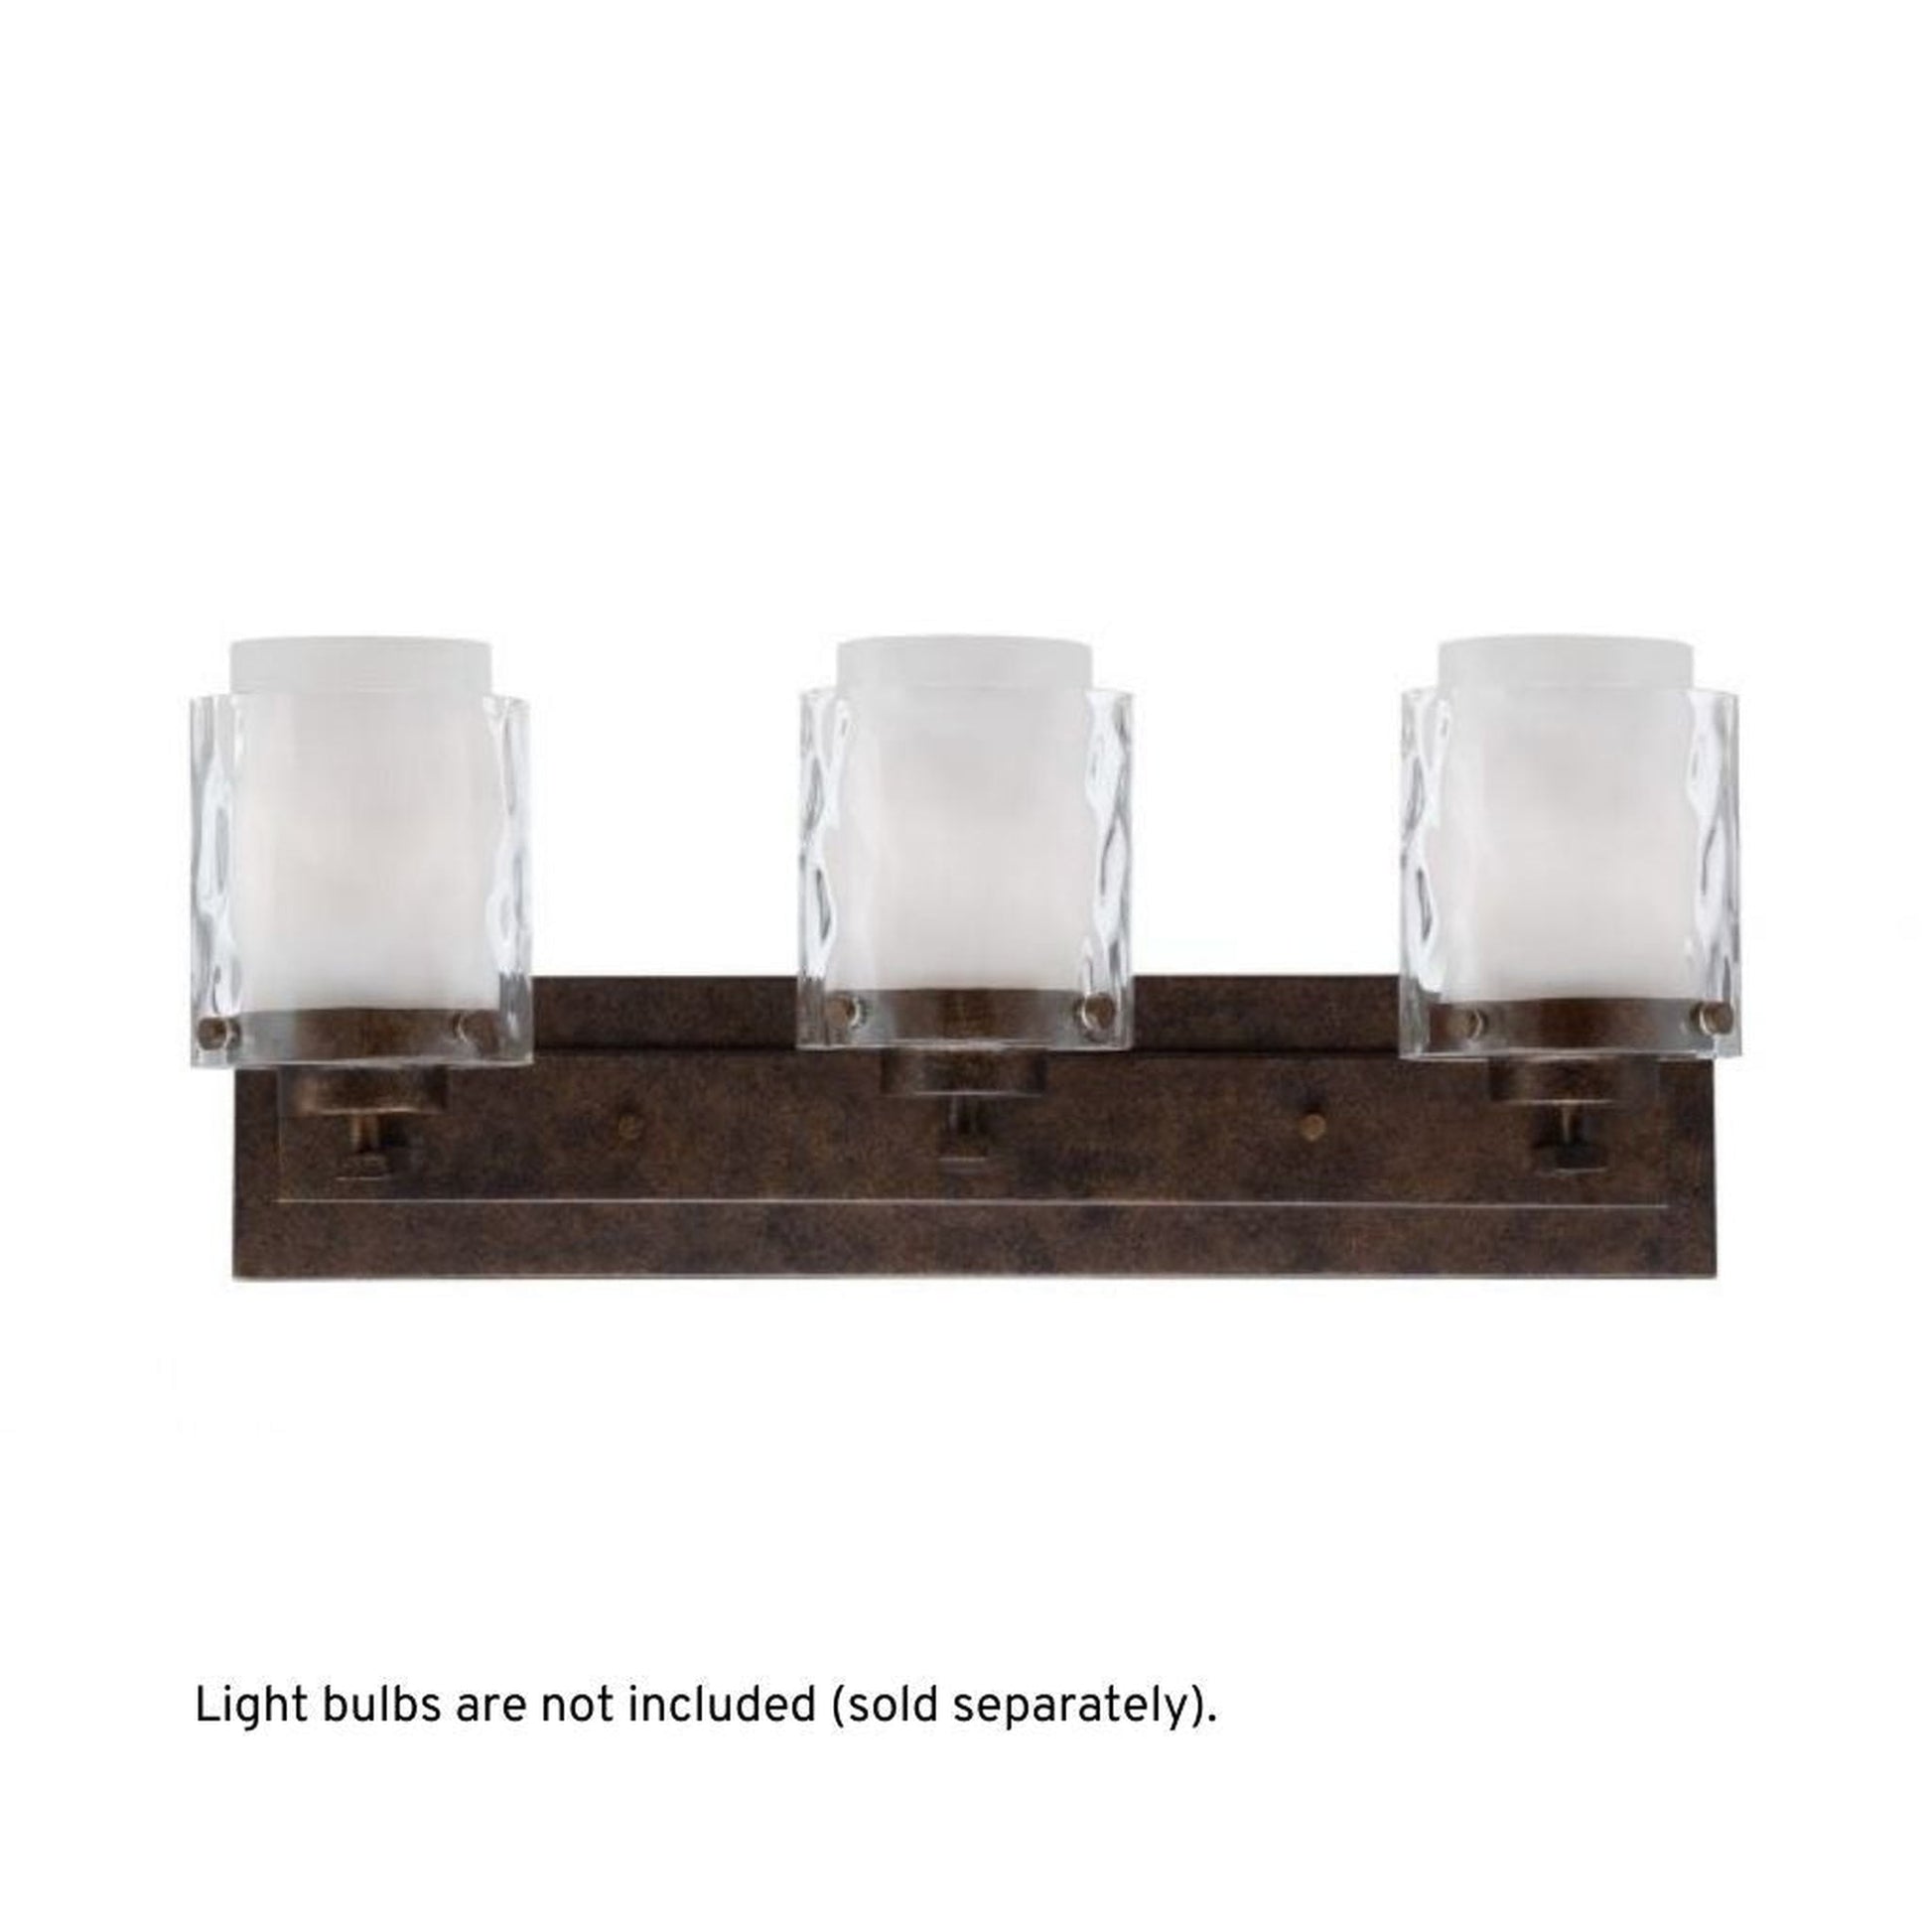 Craftmade Kenswick 24" 3-Light Peruvian Bronze Vanity Light With Clear Outer and Frosted Inner Glass Shades